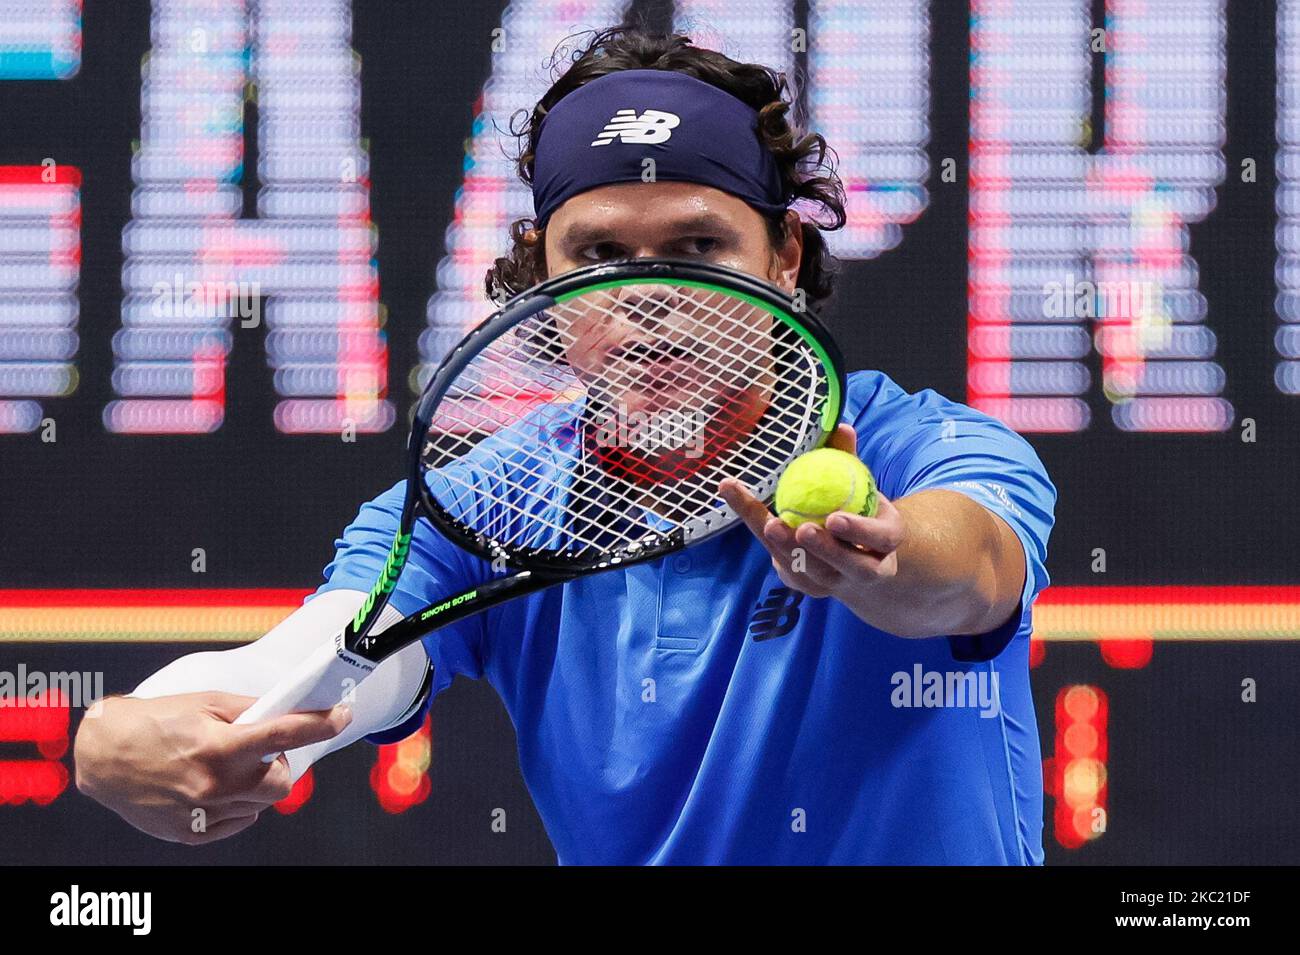 Milos Raonic of Canada serves the ball during his ATP St. Petersburg Open  2020 international tennis tournament semi-final match against Borna Coric  of Croatia on October 17, 2020 at Sibur Arena in